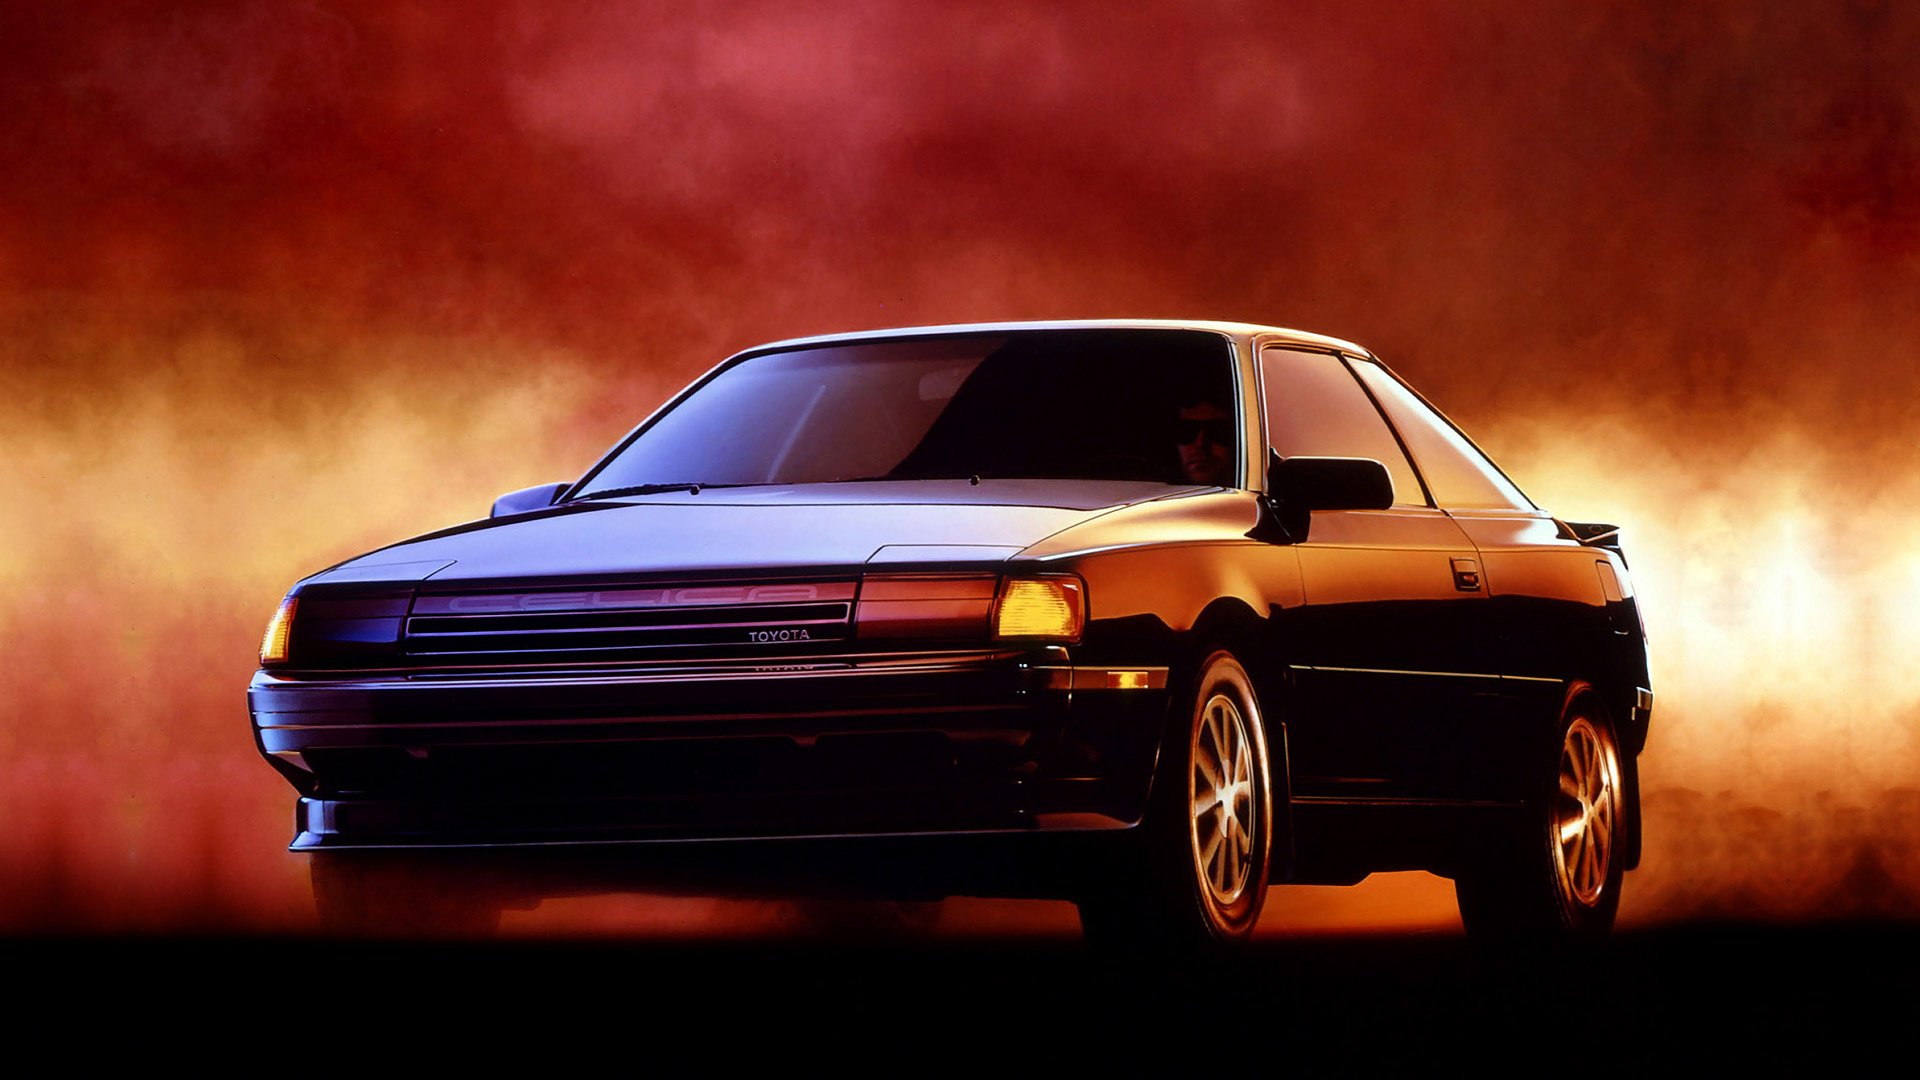 1986 Toyota Celica Wallpapers amp HD Images   WSupercars